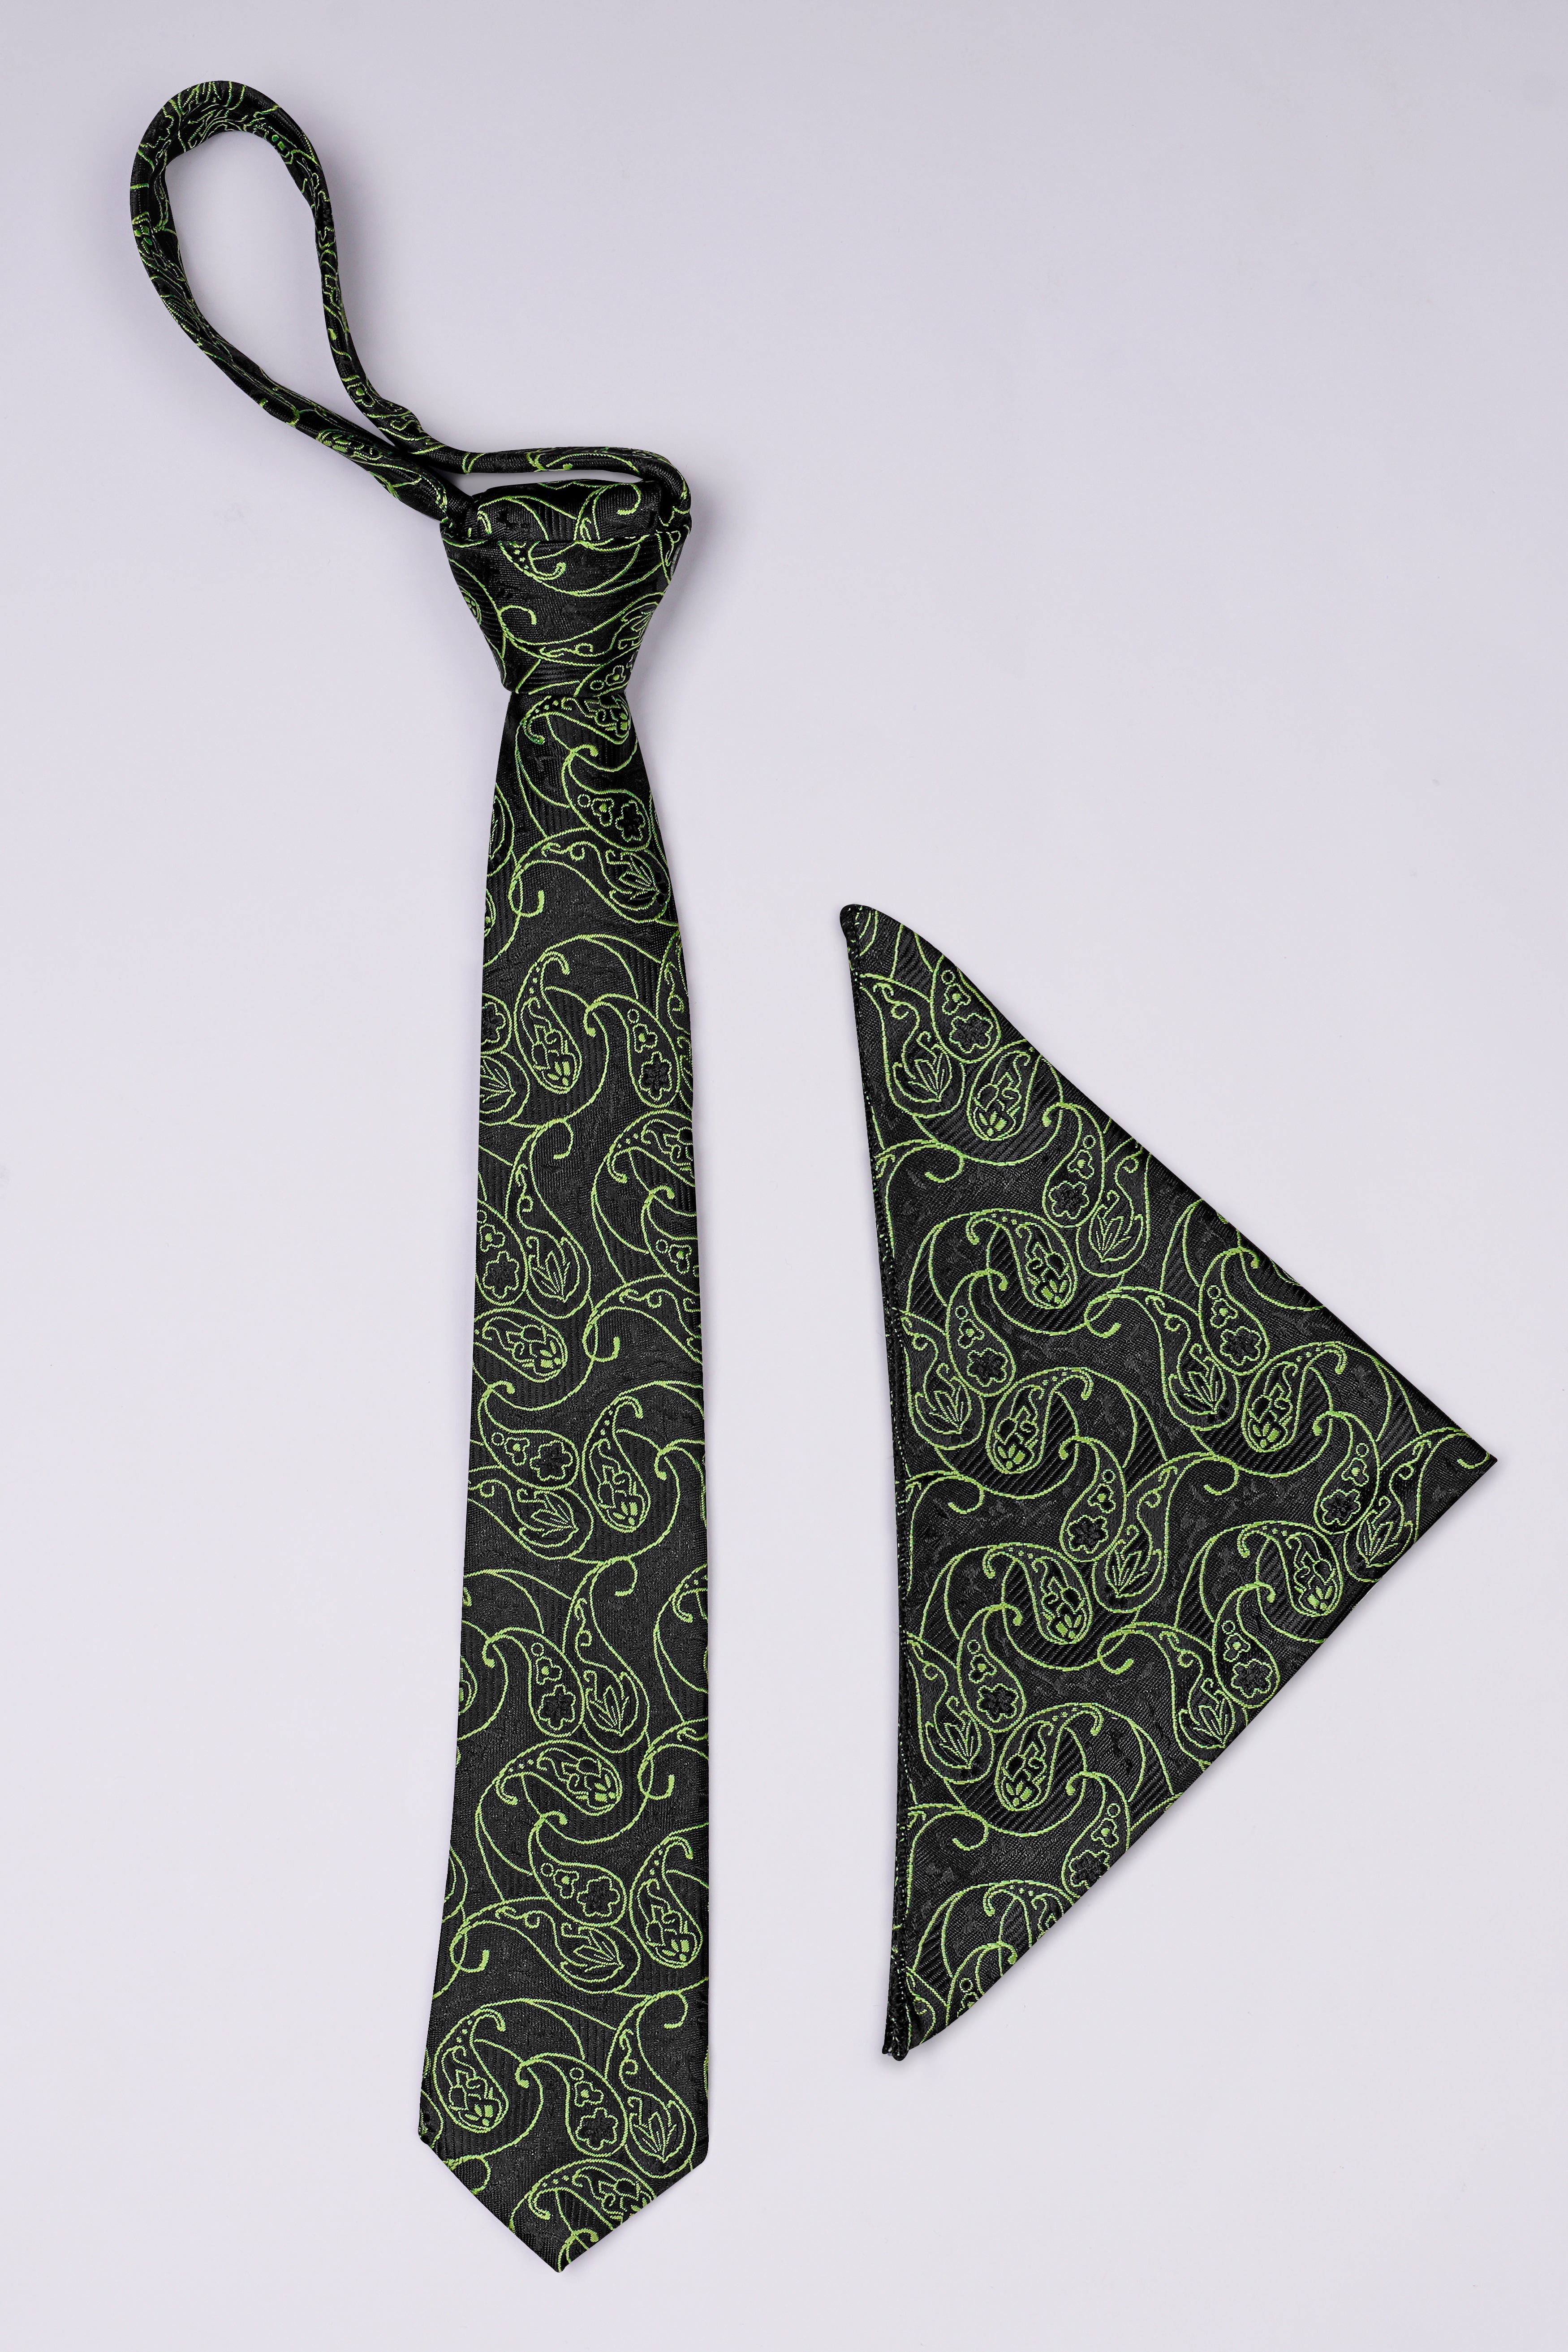 Jade Black with Olivine Green Paisley Jacquard Tie with Pocket Square TP067